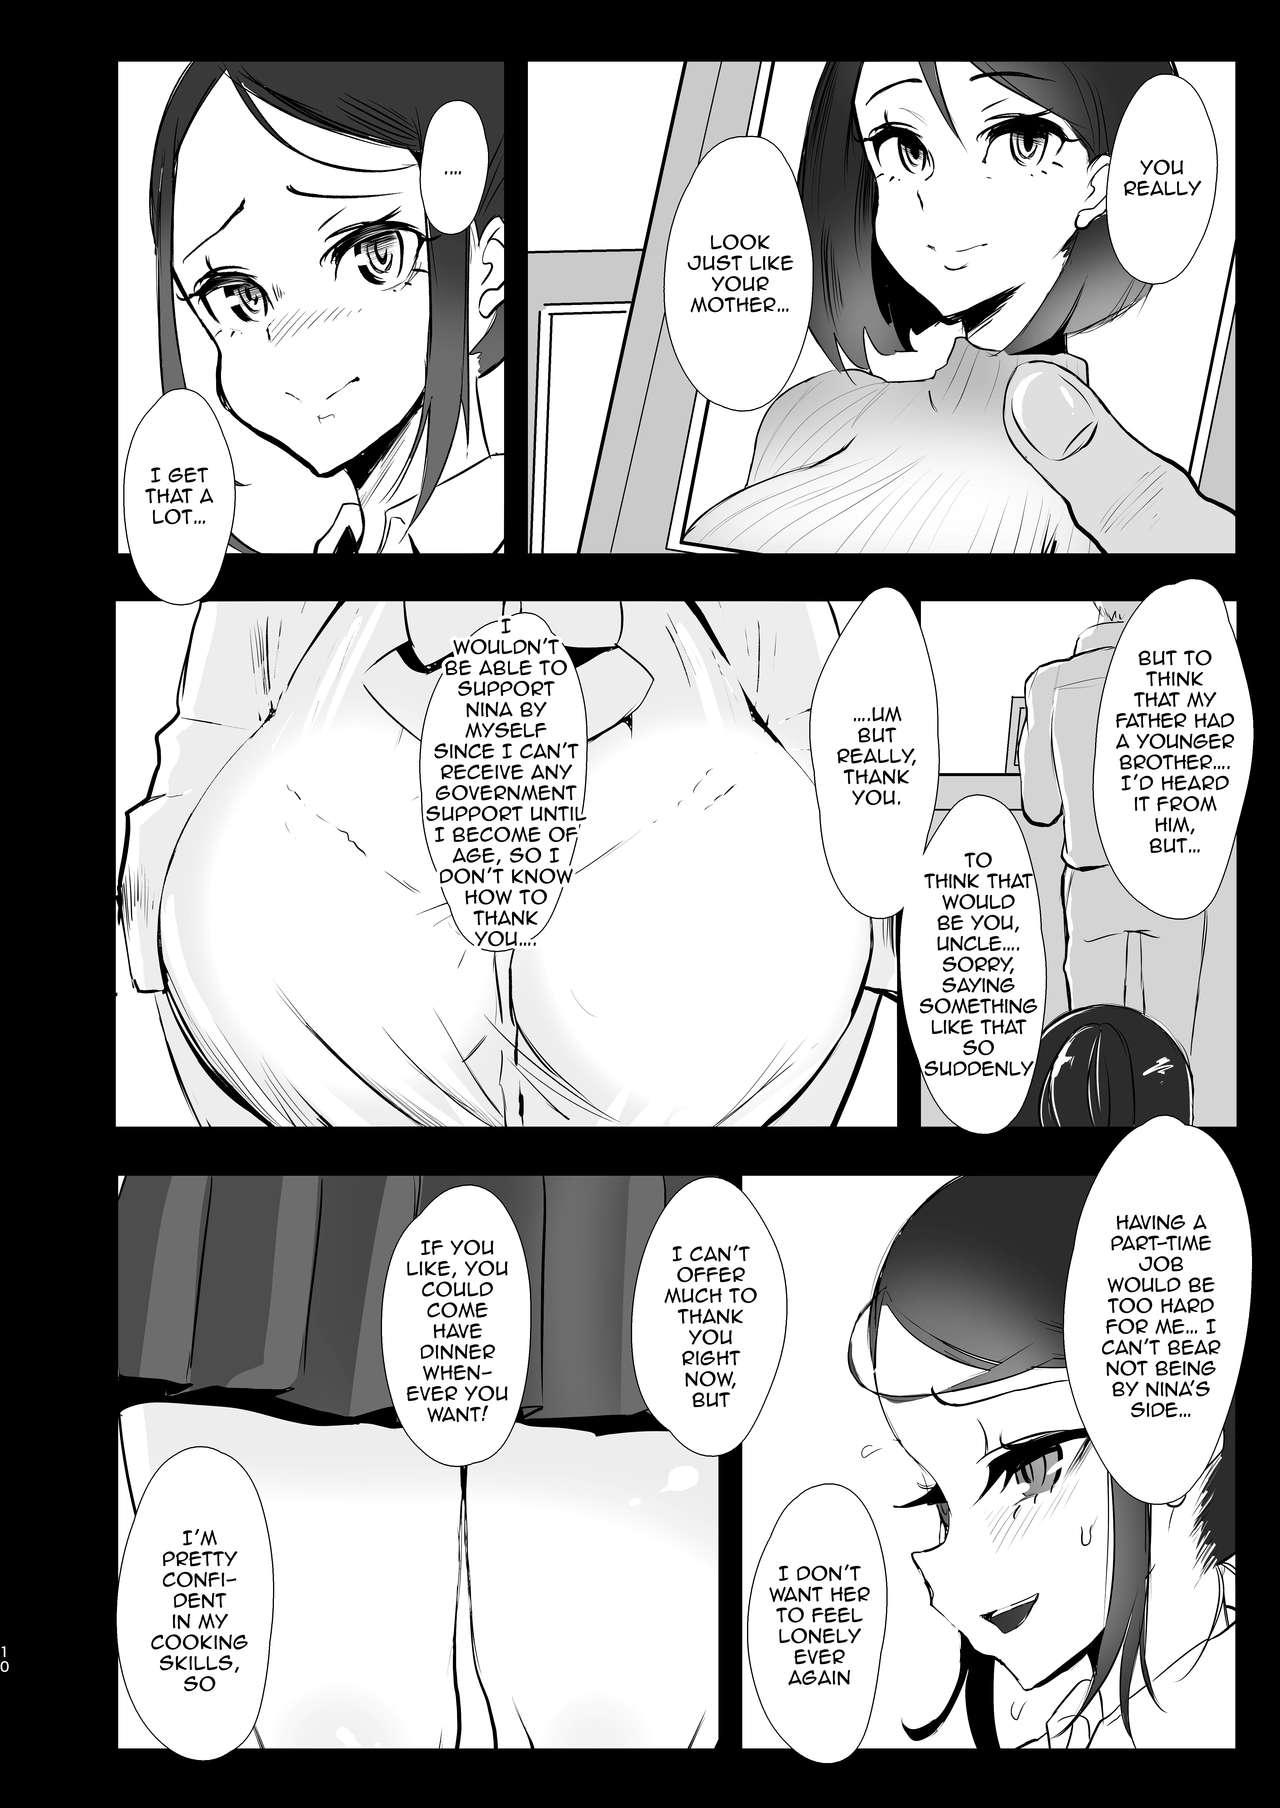 Hardon Himawari no Kage | The Other Side of the Sunflower - Original Cheating - Page 9